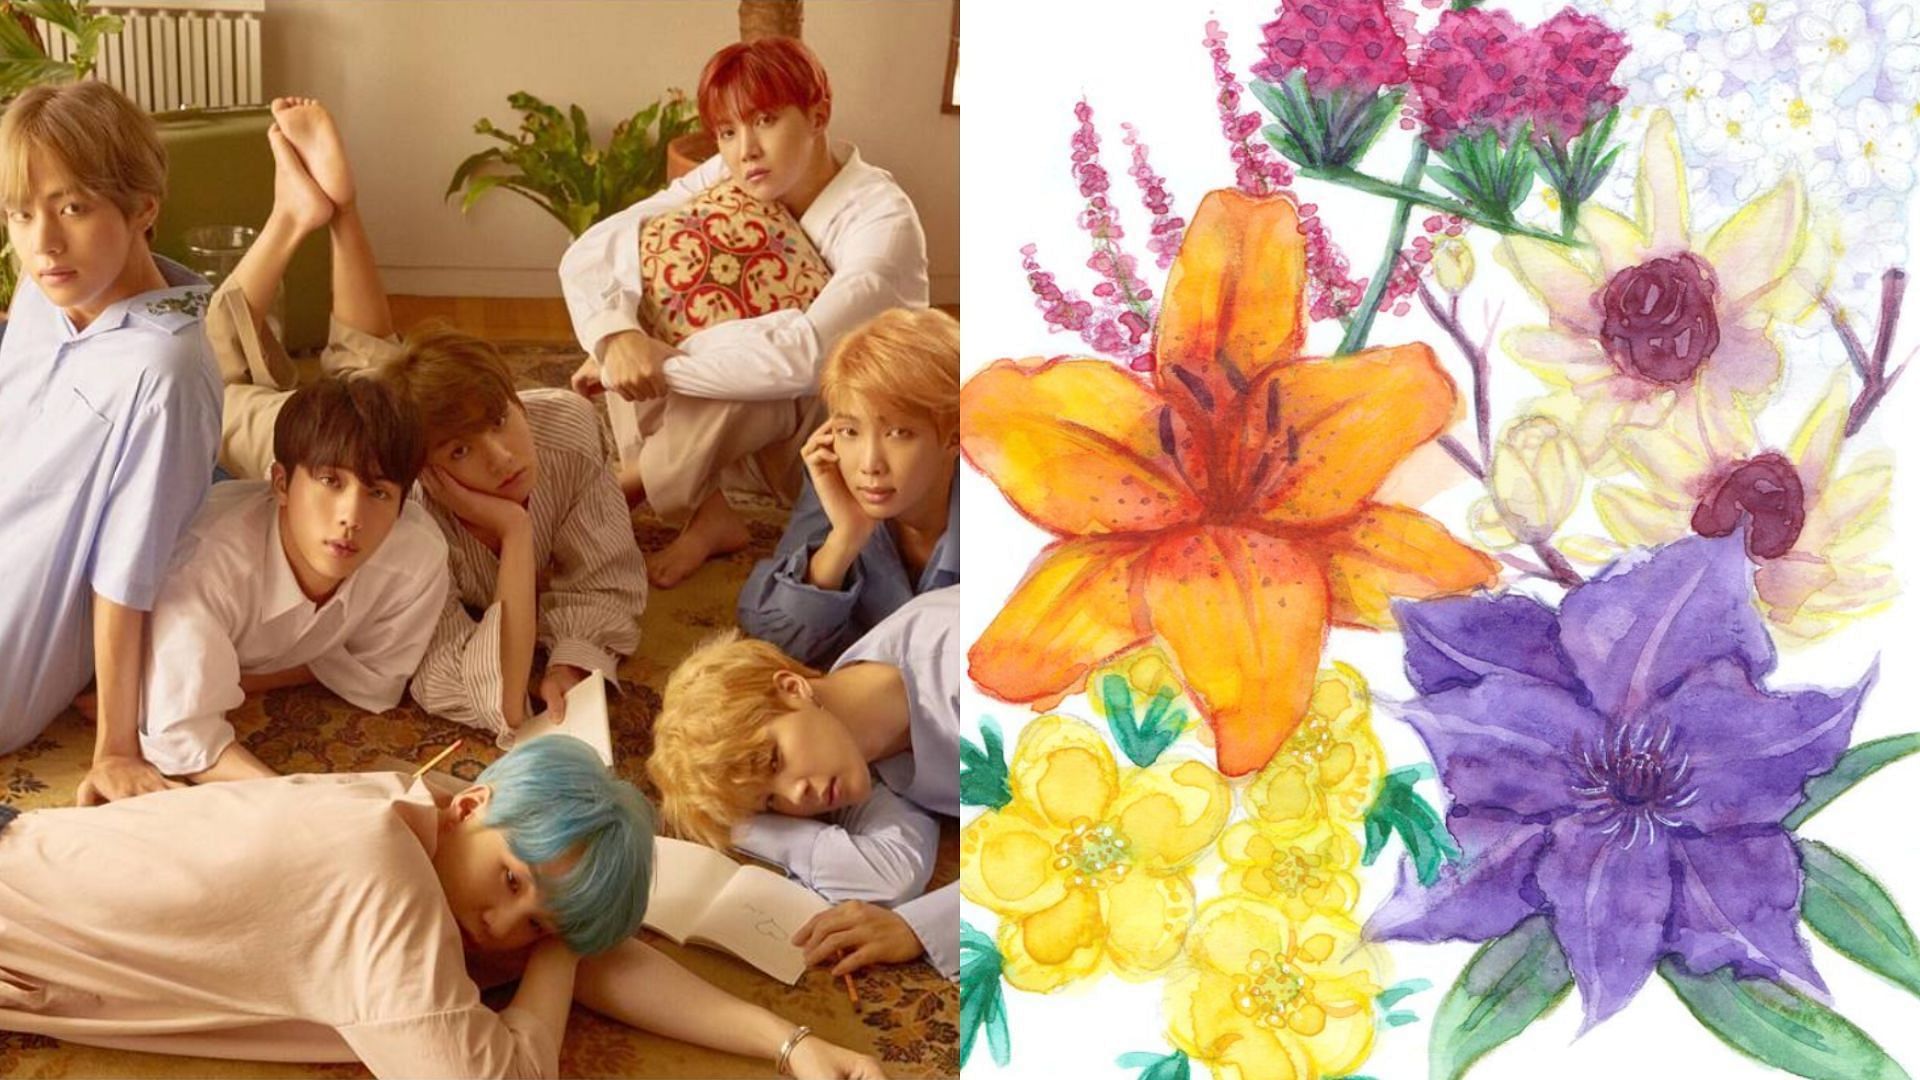 Find Out More About The Flower Face Mask Which BTS's J-Hope Had